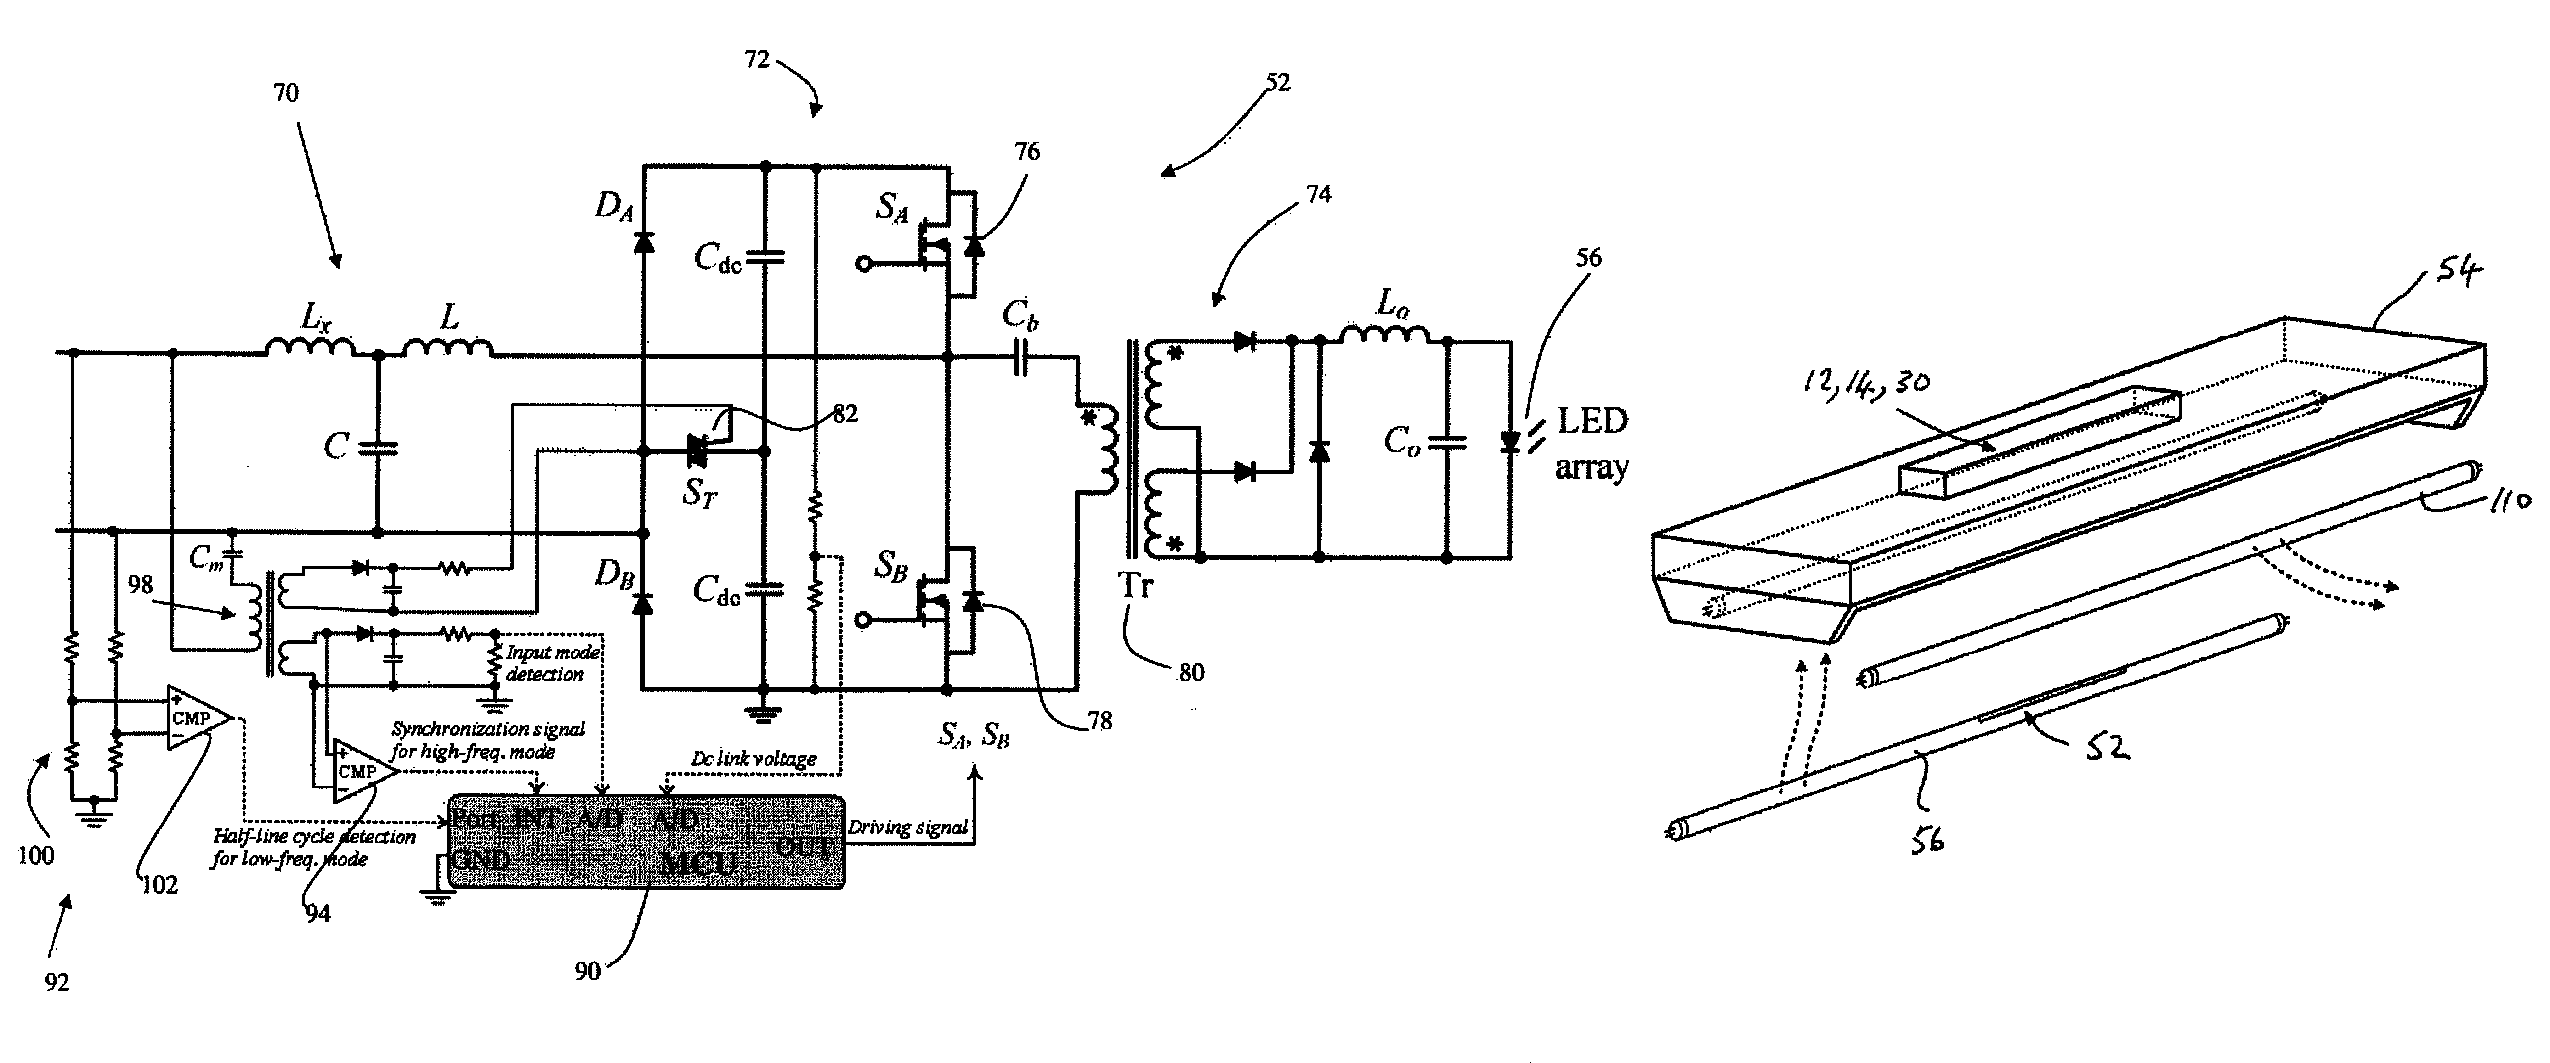 Driver circuit for powering a DC lamp in a non-DC lamp fitting